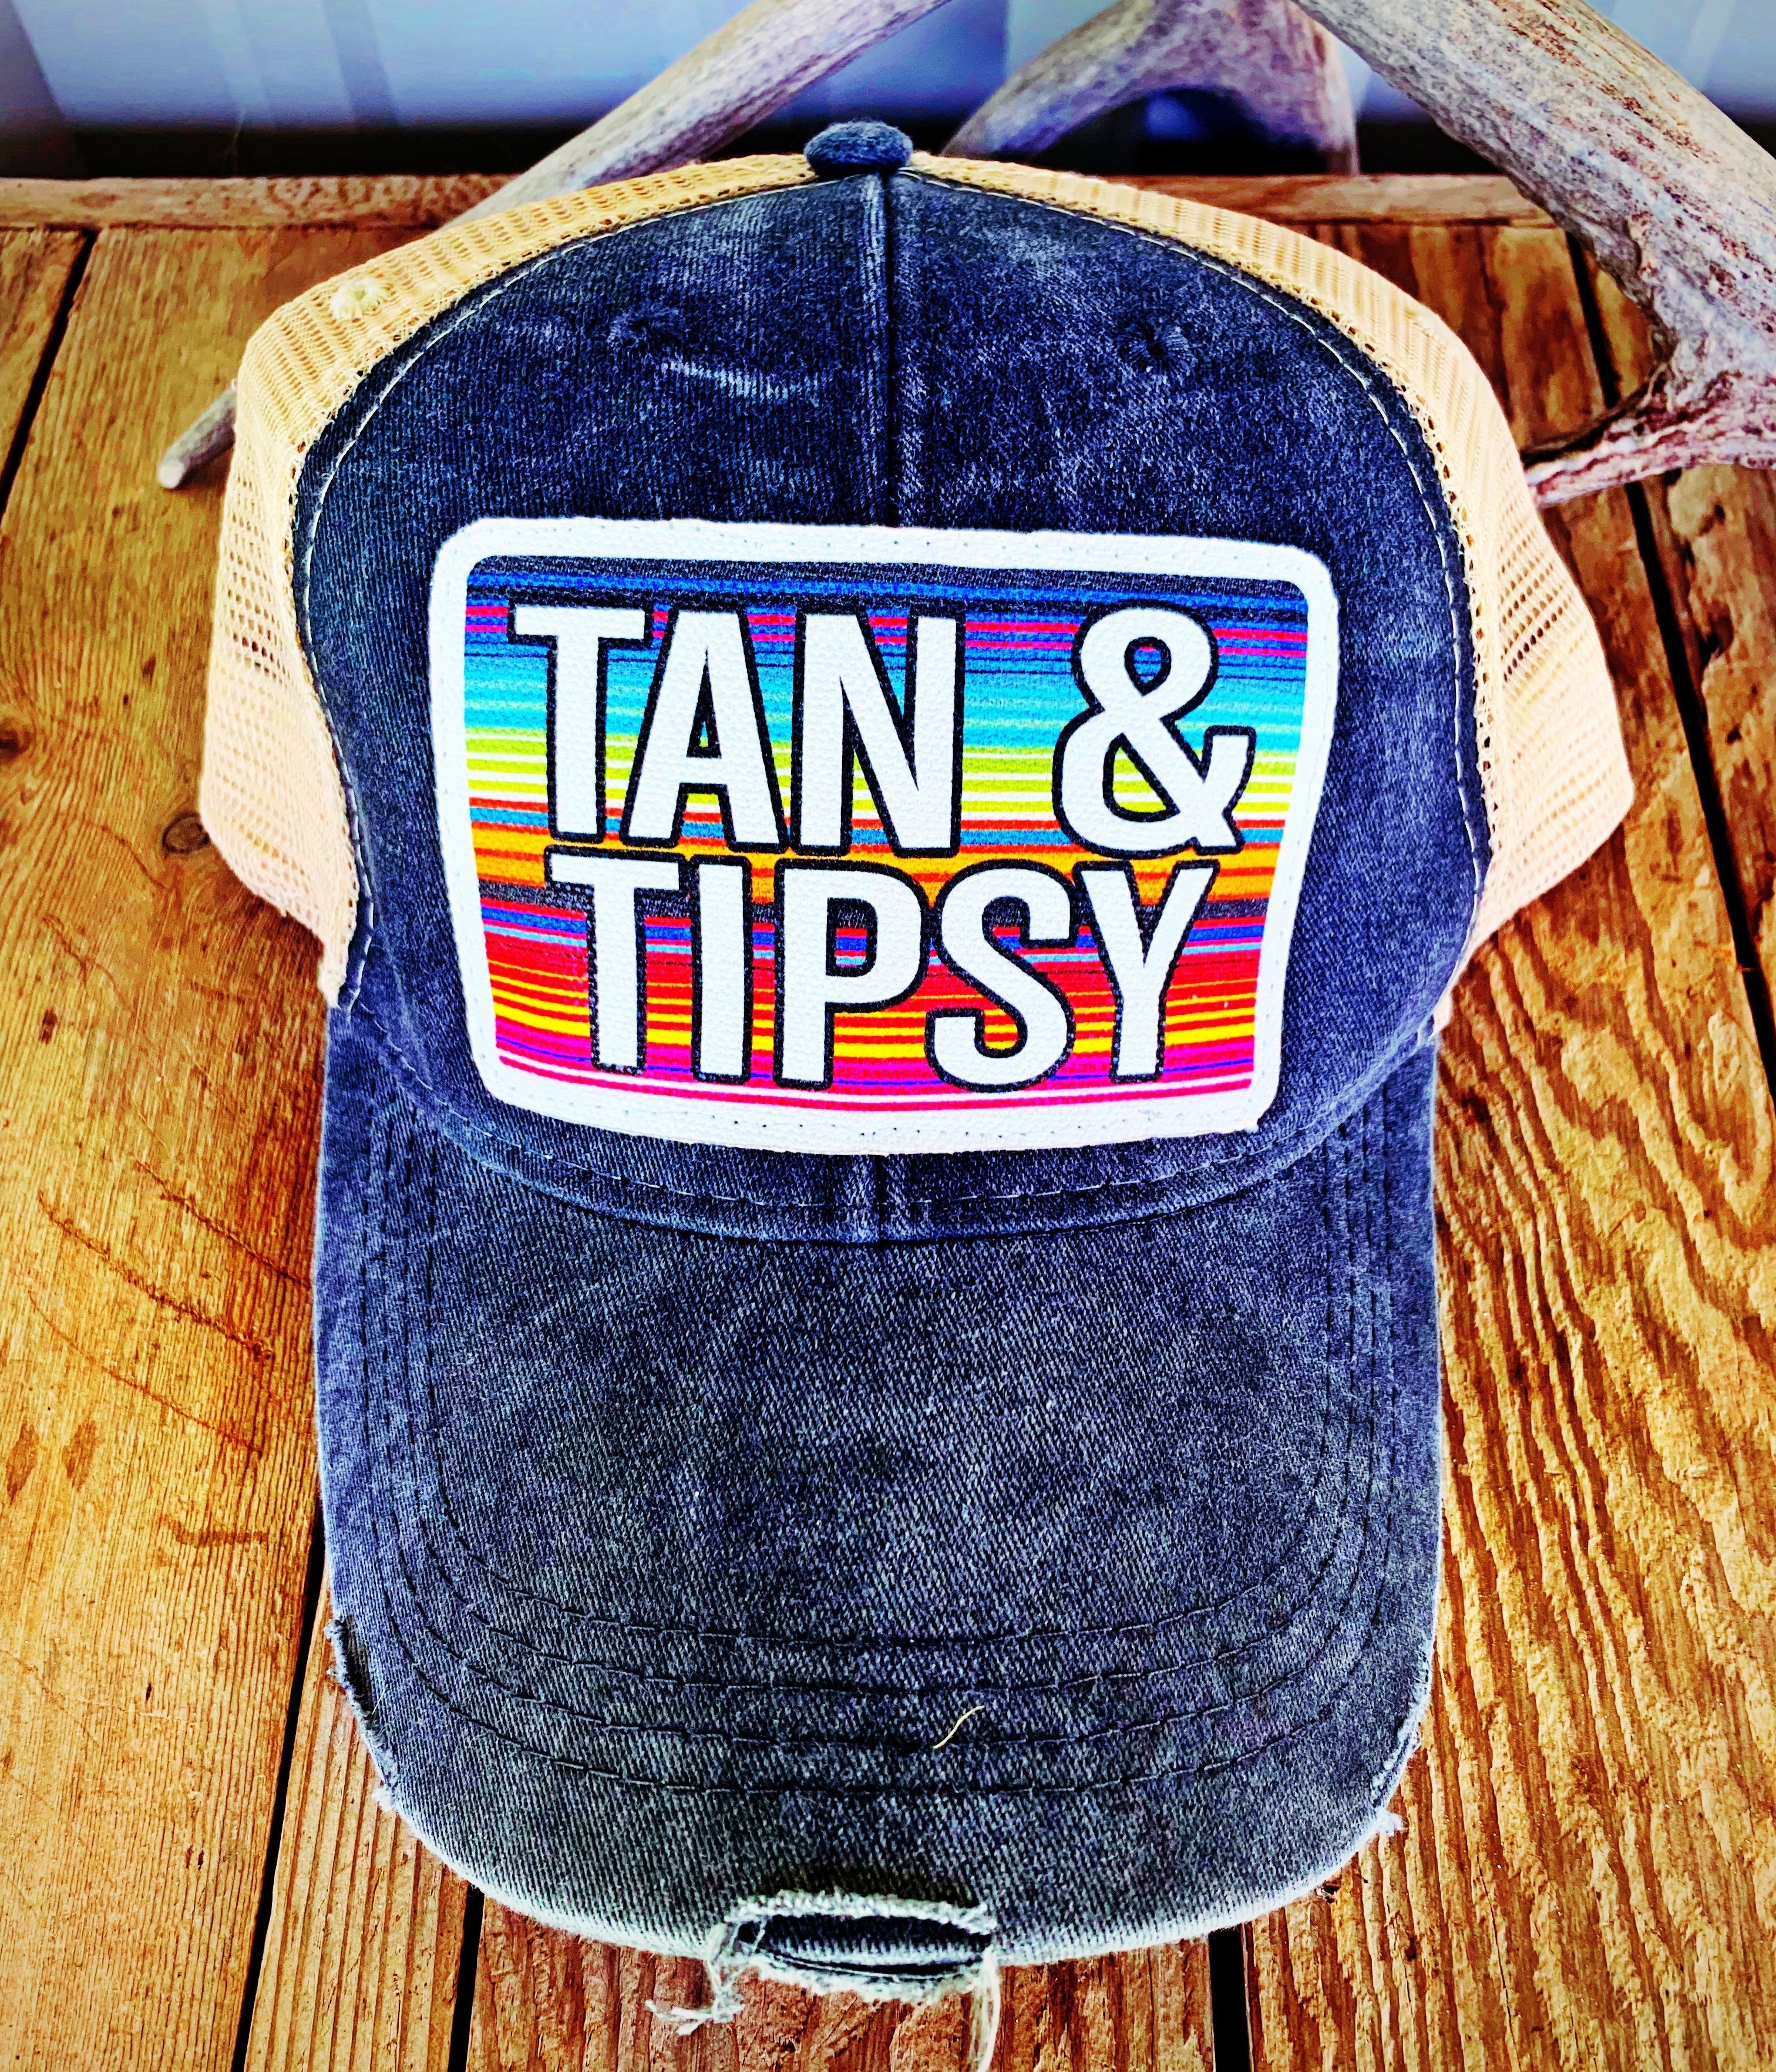 Tan & Tipsy Hat - Anagails exclusive hat line is finally here! We all hate bad hair days, and putting on a boring old hat can make it even worse! Brighten up your day with one.  These adorable hats are One Size, adjustable light weight baseball caps.  Great for trips to the beach, pool or a day out running errands! 